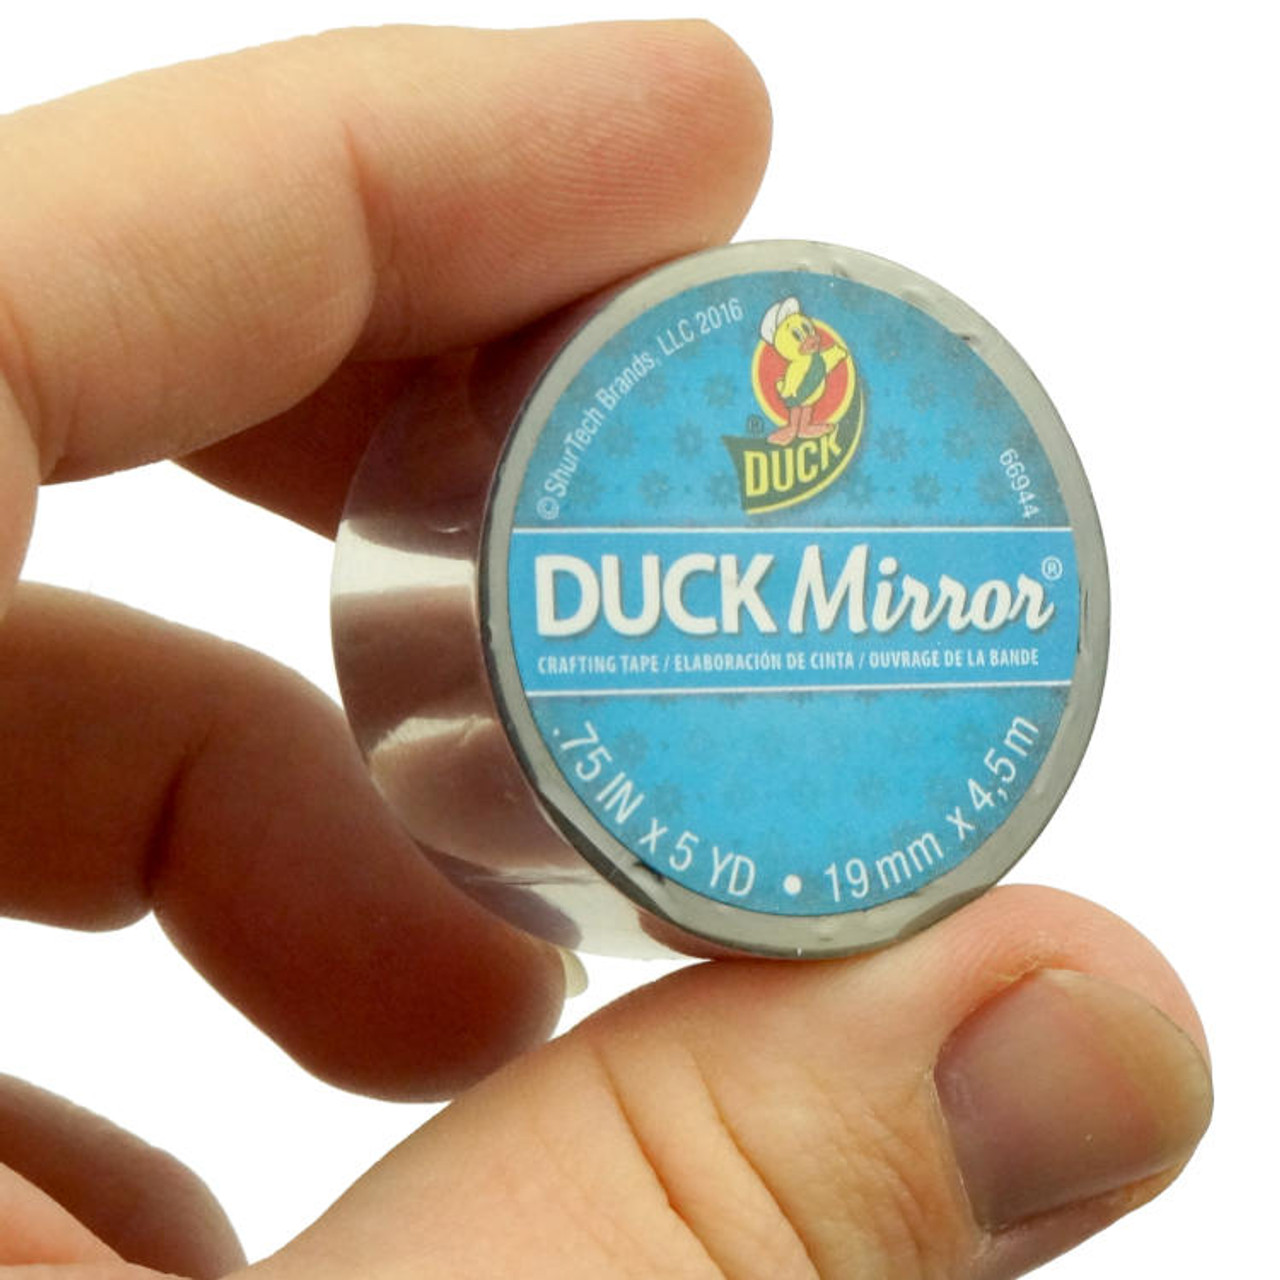 Duck Brand 1.88 in. x 5 yd. Gold Mirror Acrylic Crafting Tape 